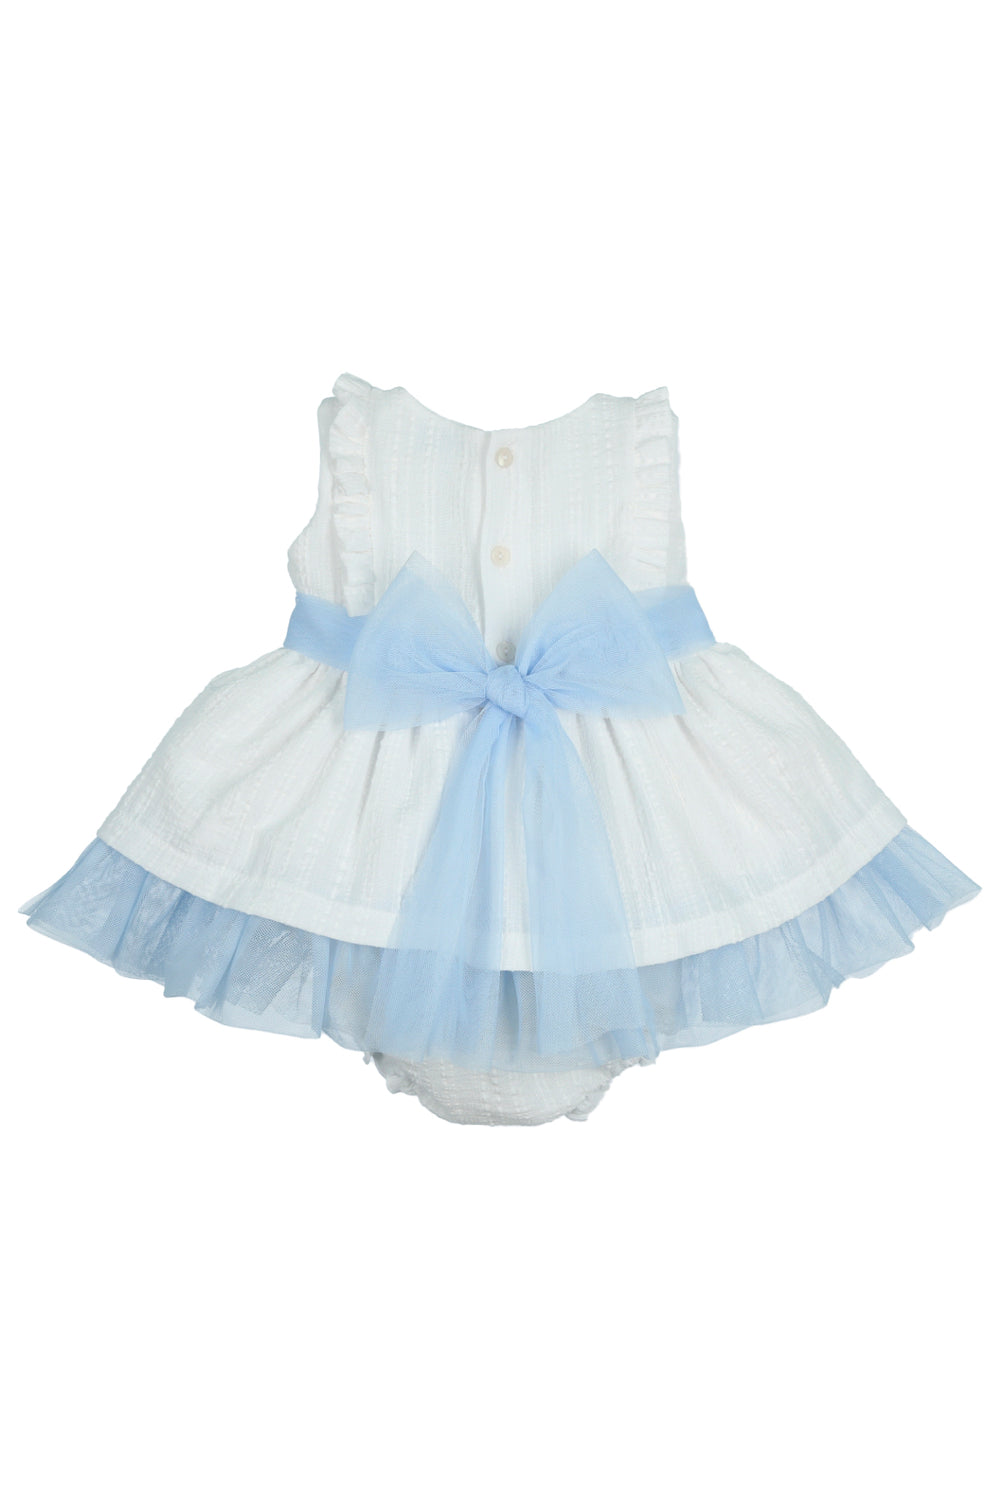 Mac Ilusión "Roselyn" White & Blue Tulle Dress & Bloomers | Millie and John